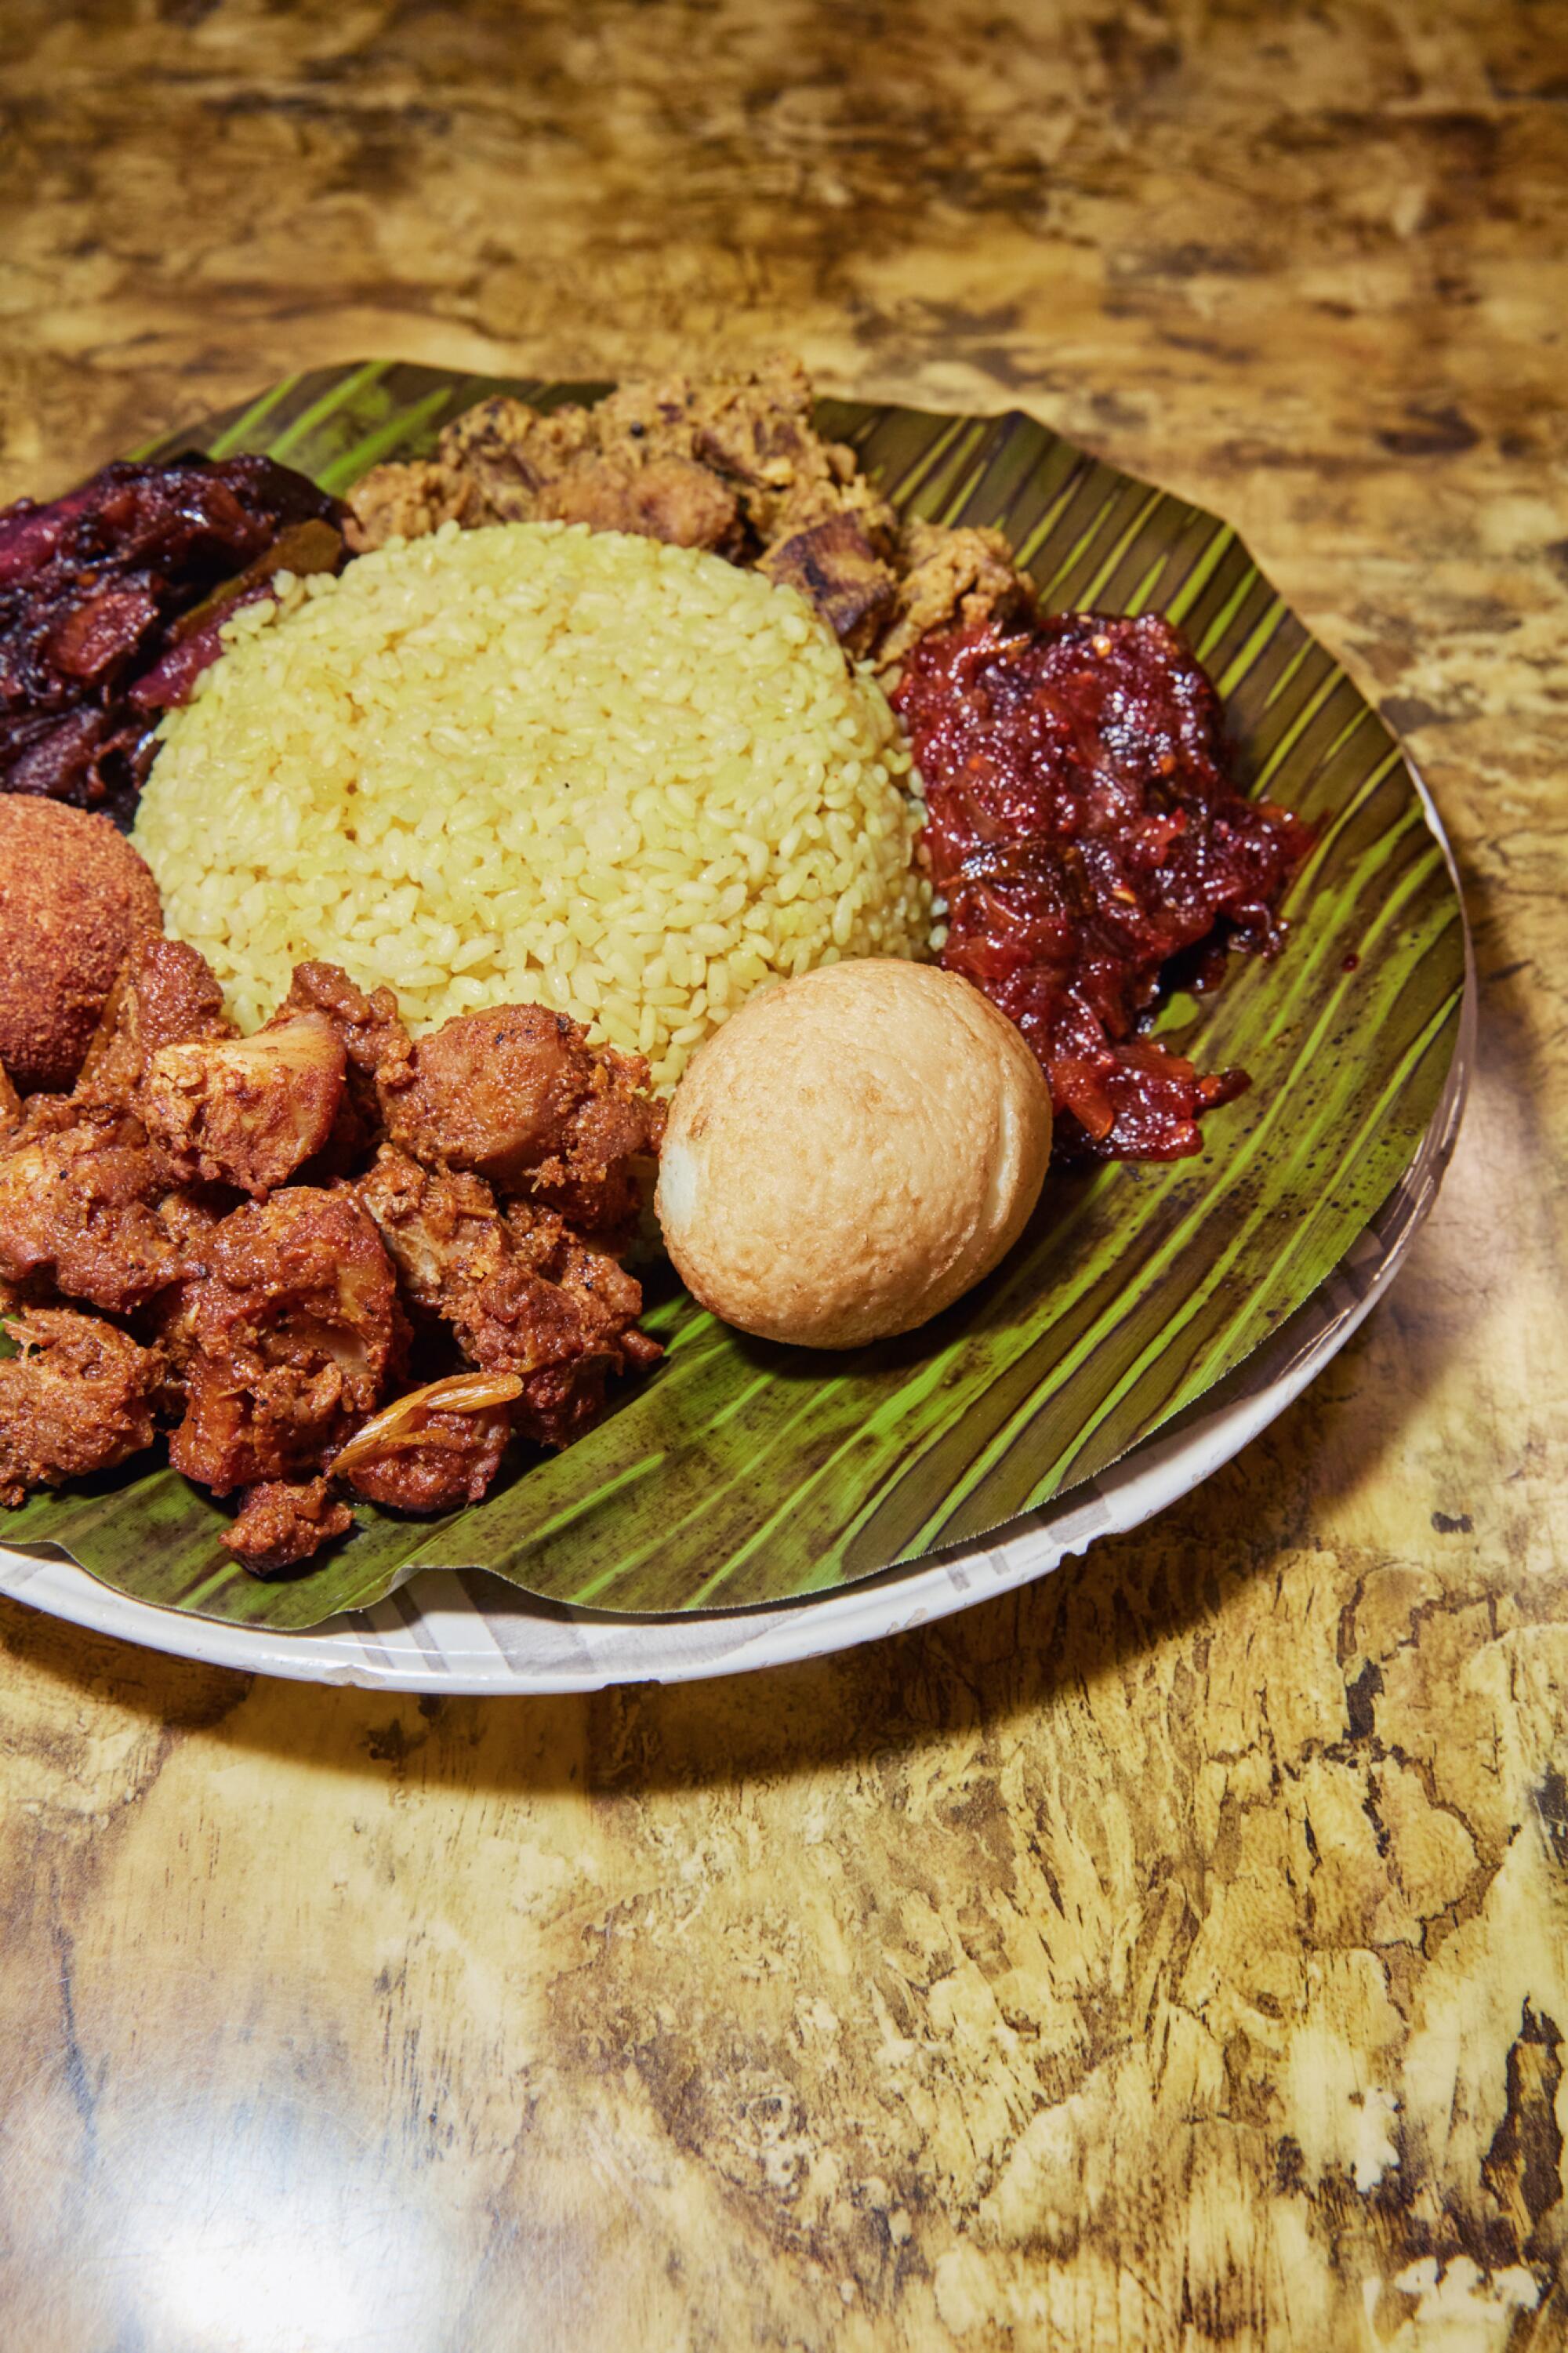 Lamprais, a popular Sri Lankan dish, served with sides on a banana leaf